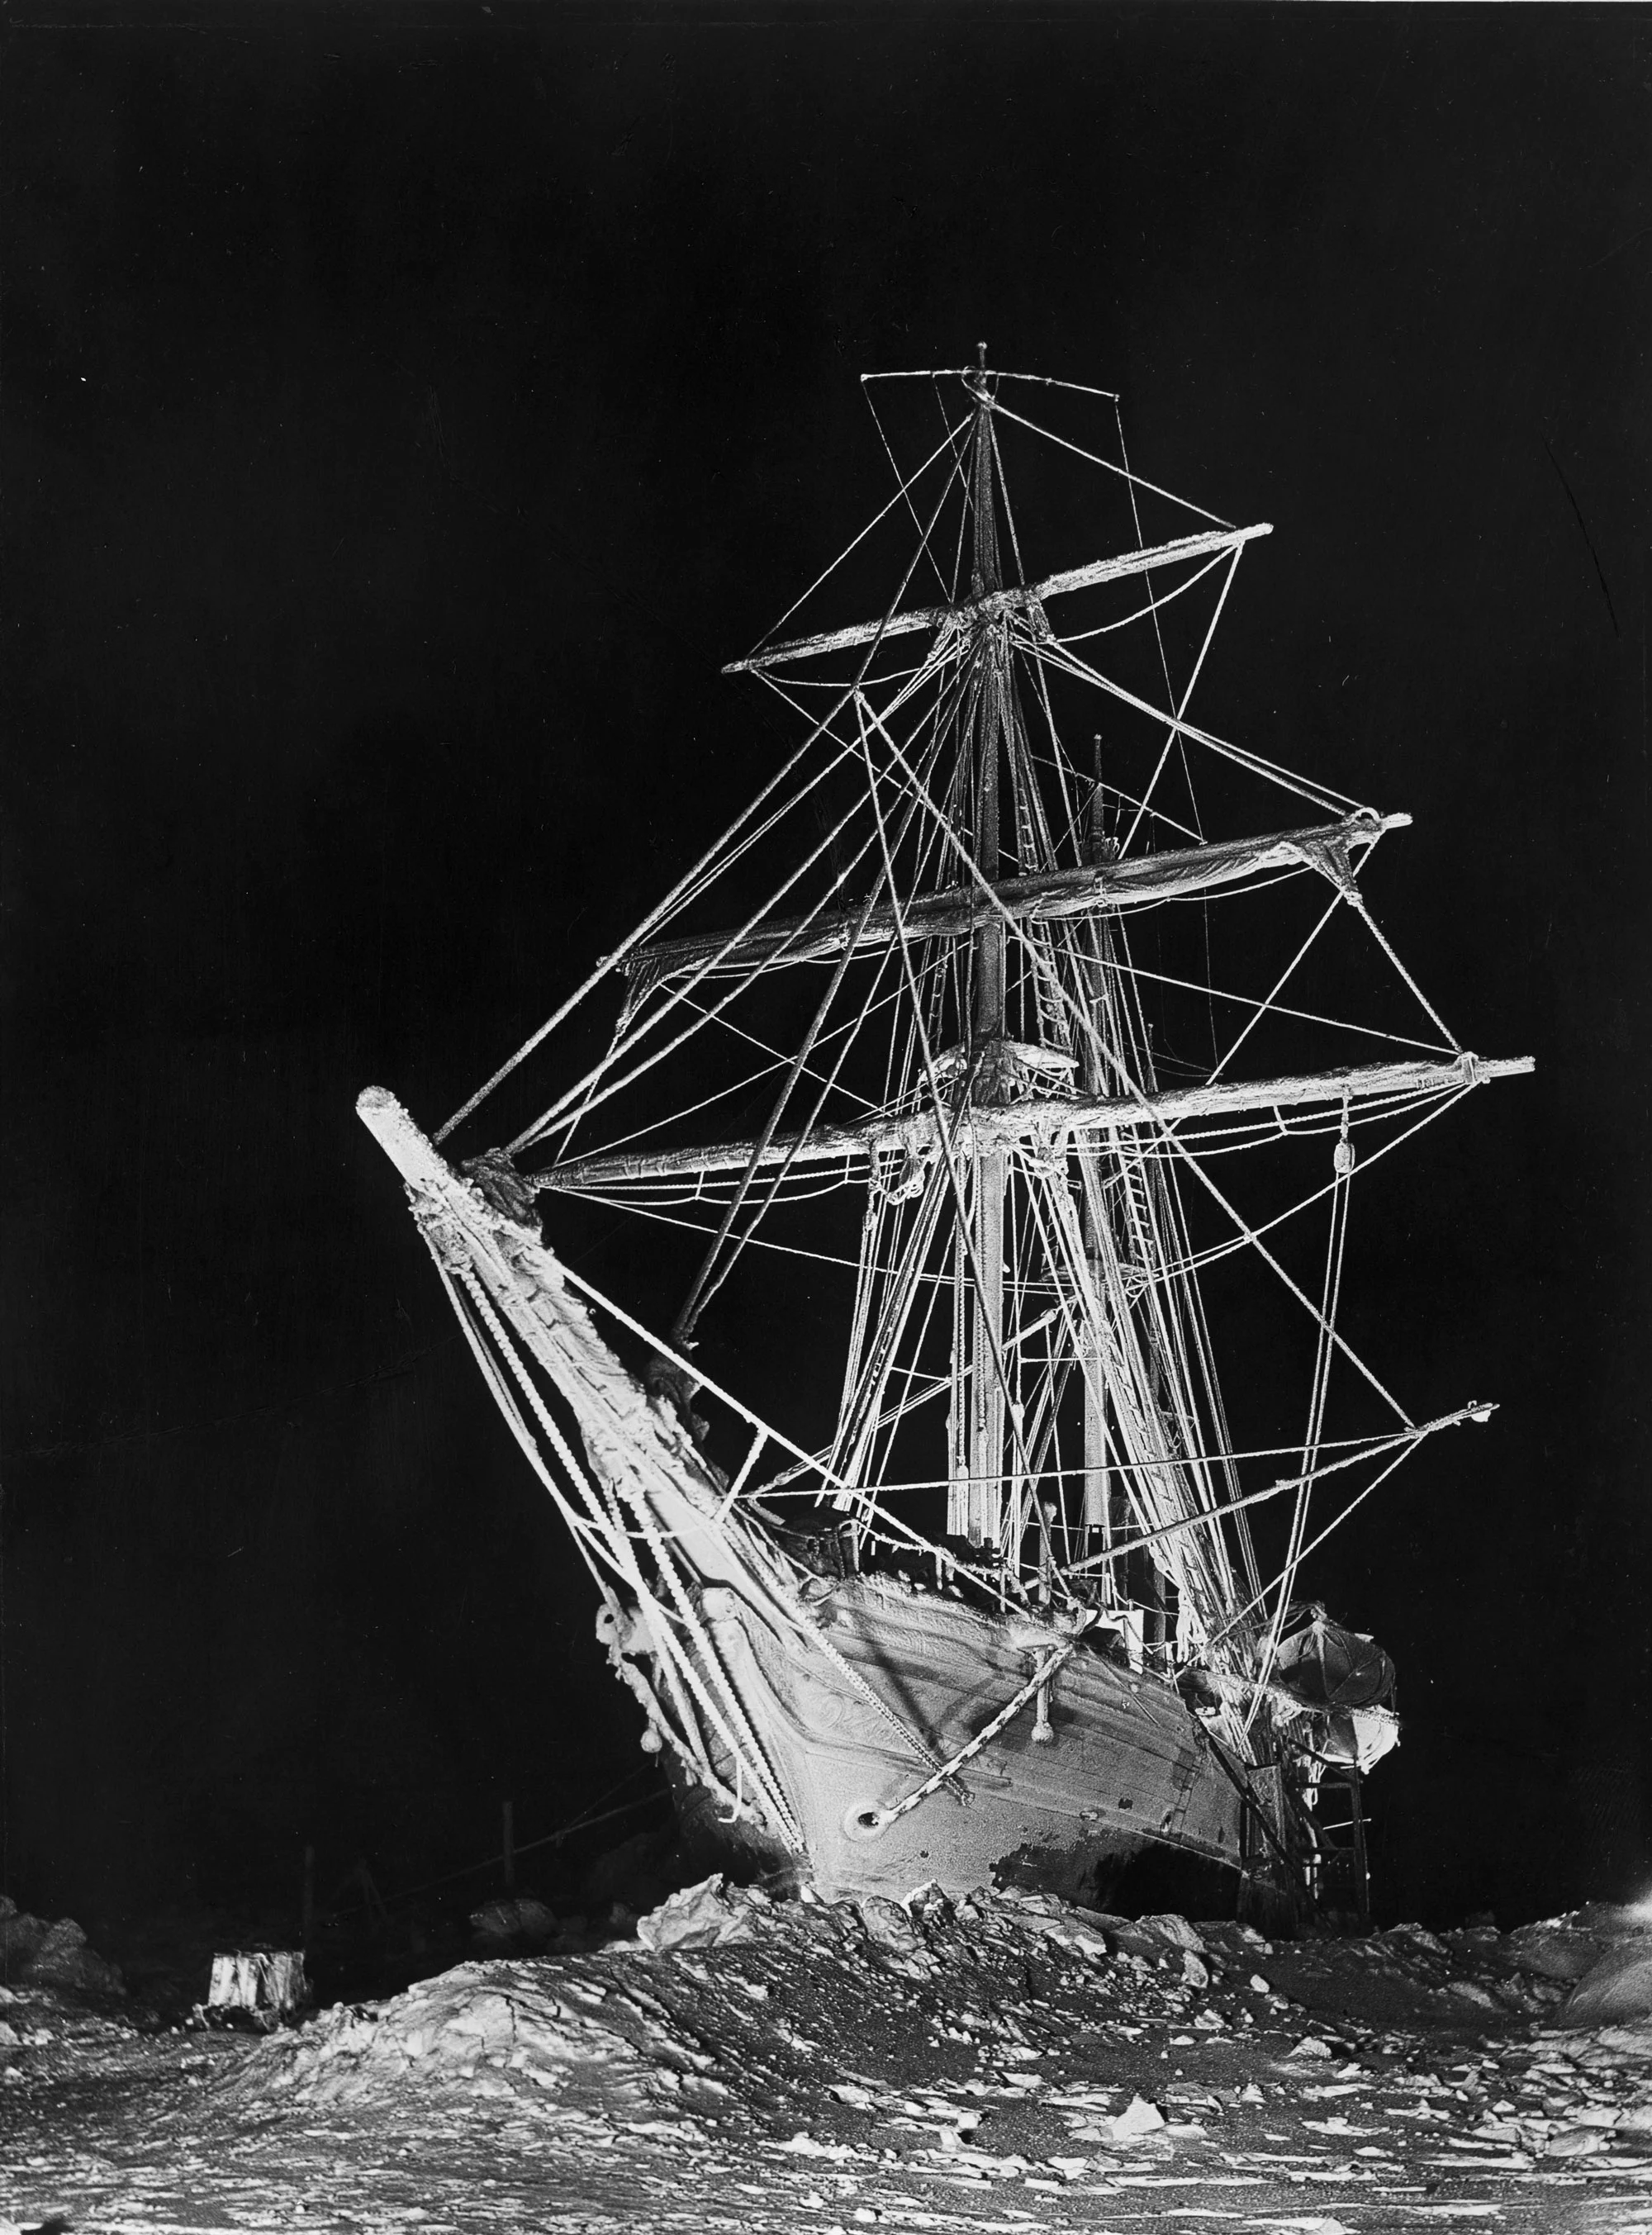 'The Long long night' Endurance beset by pack ice during the polar night. © Royal Geographical Society (with IBG)